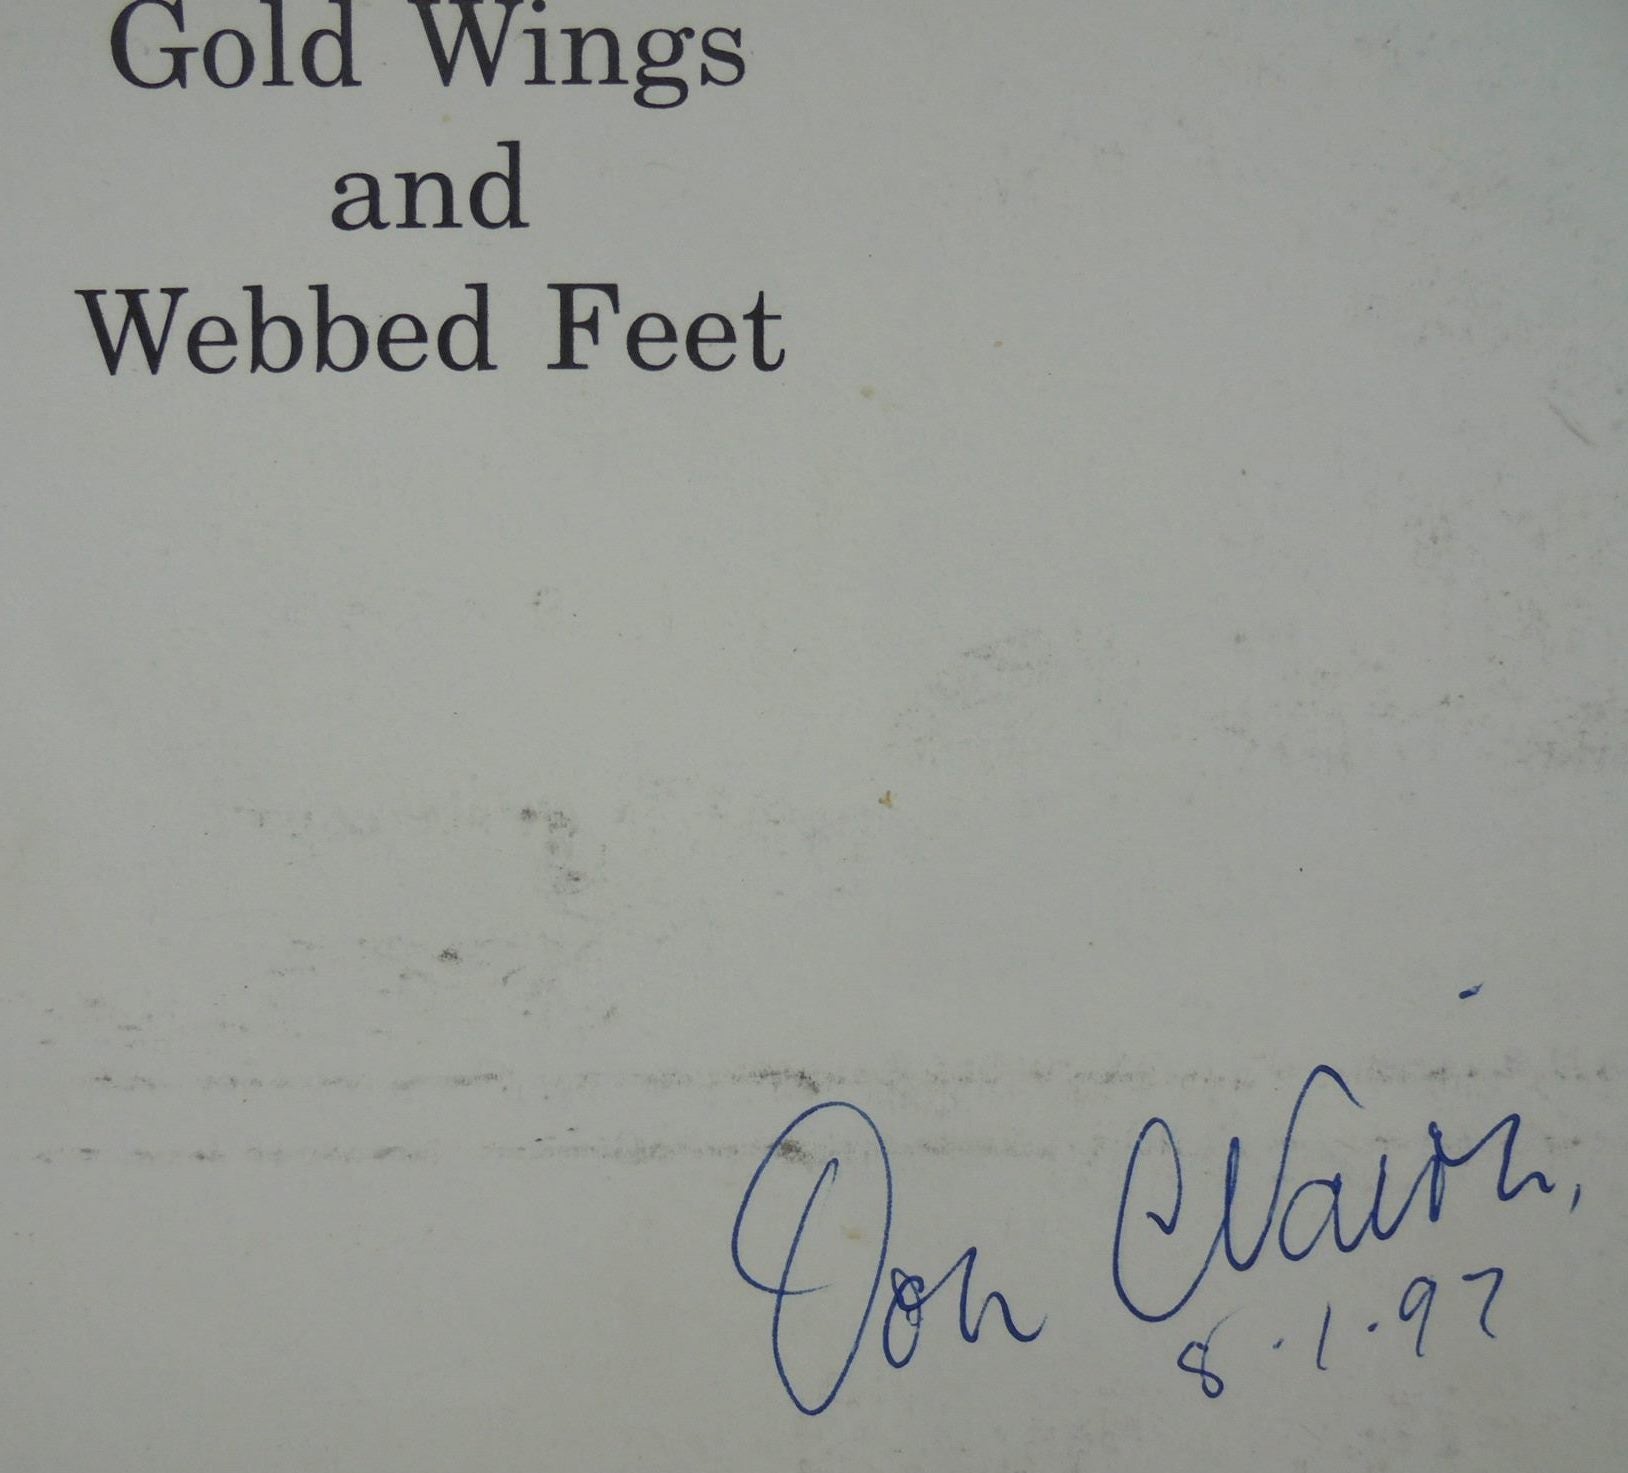 Gold Wings and Webbed Feet The Autobiography of a New Zealand pilot, his Naval and Civilian Flying experiences By Don Nairn. SCARCE SIGNED BY AUTHOR.